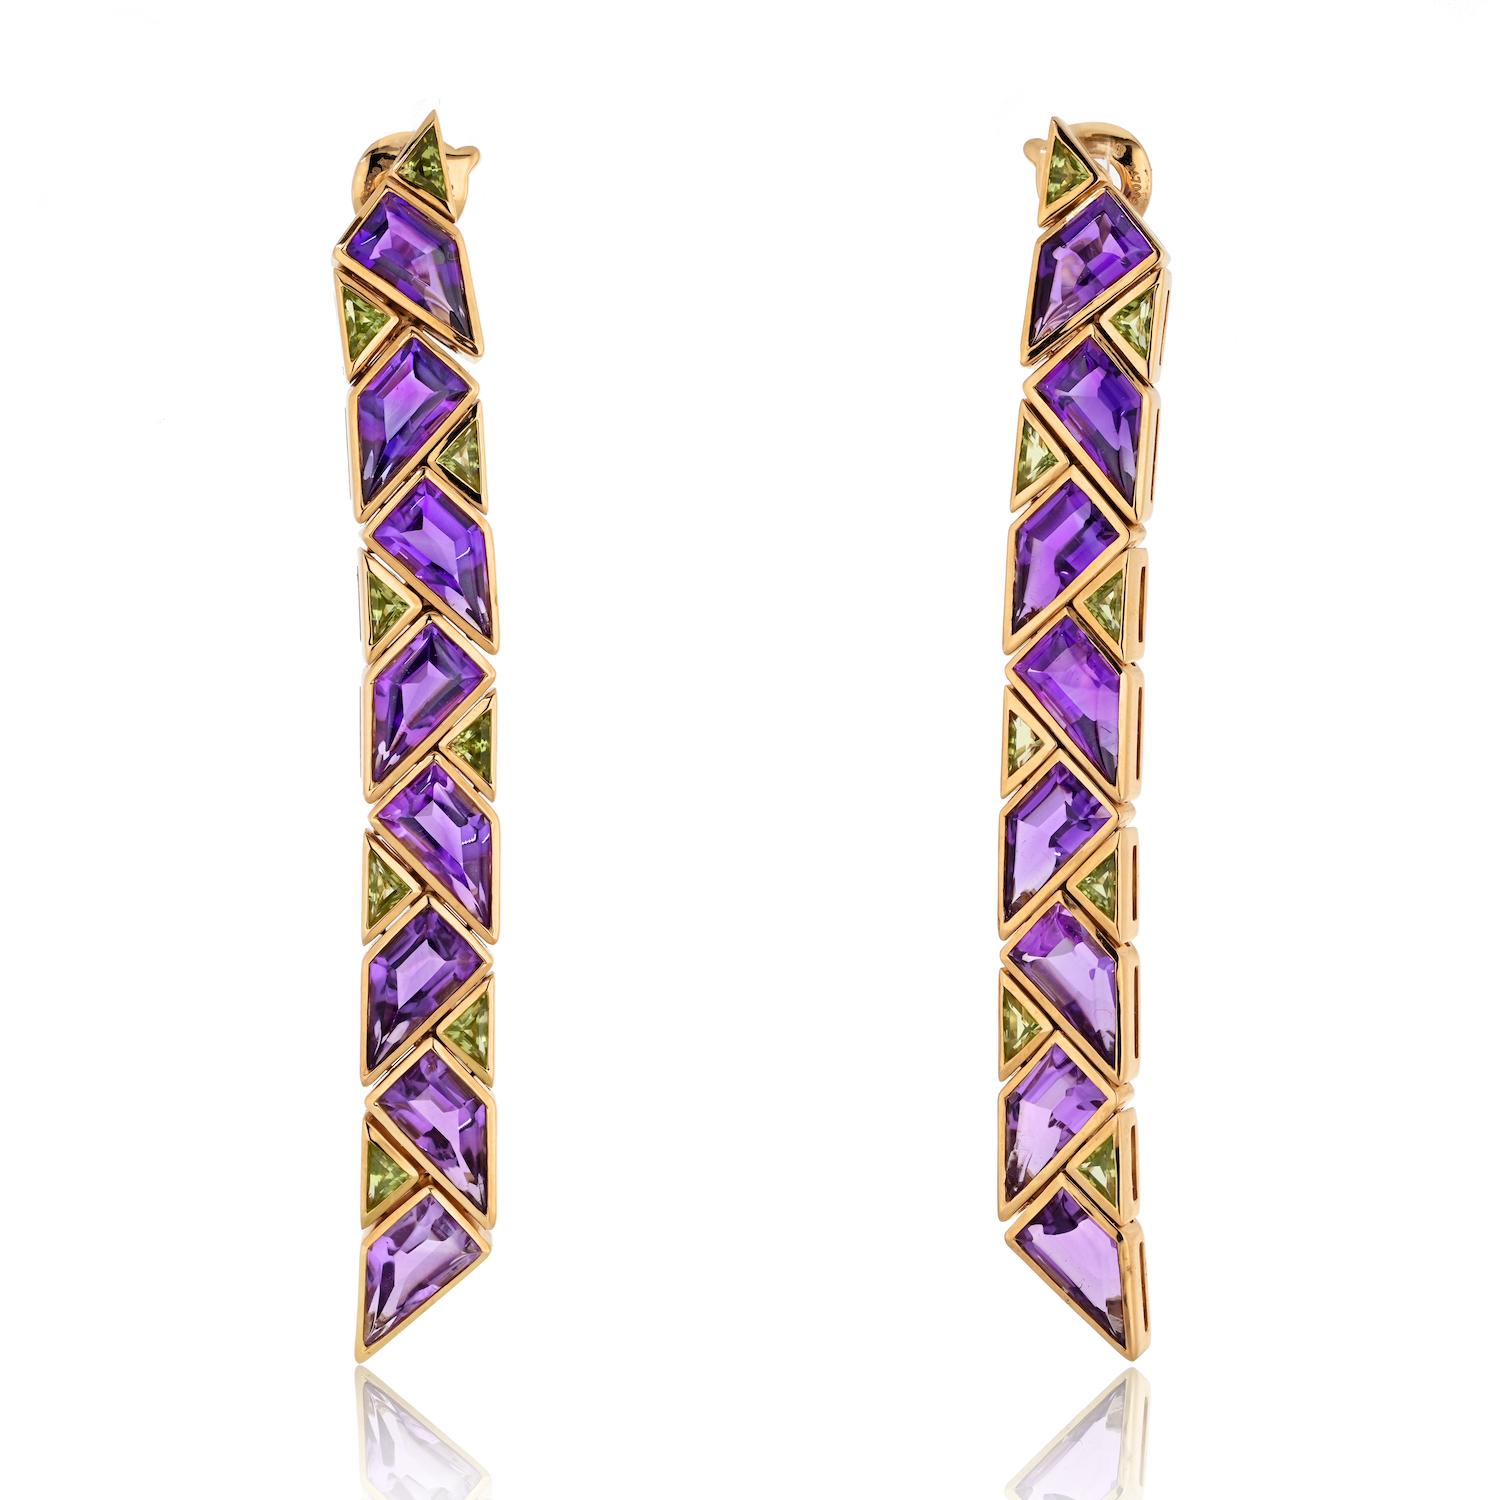 Beautiful vintage earrings made in Milano Italy by the iconic Marina Bvlgari, back in the 1989. This dangle drop pair is from the highly collectable Pyramide collection carefully crafted in solid yellow gold of 18 karats with high polished finish.